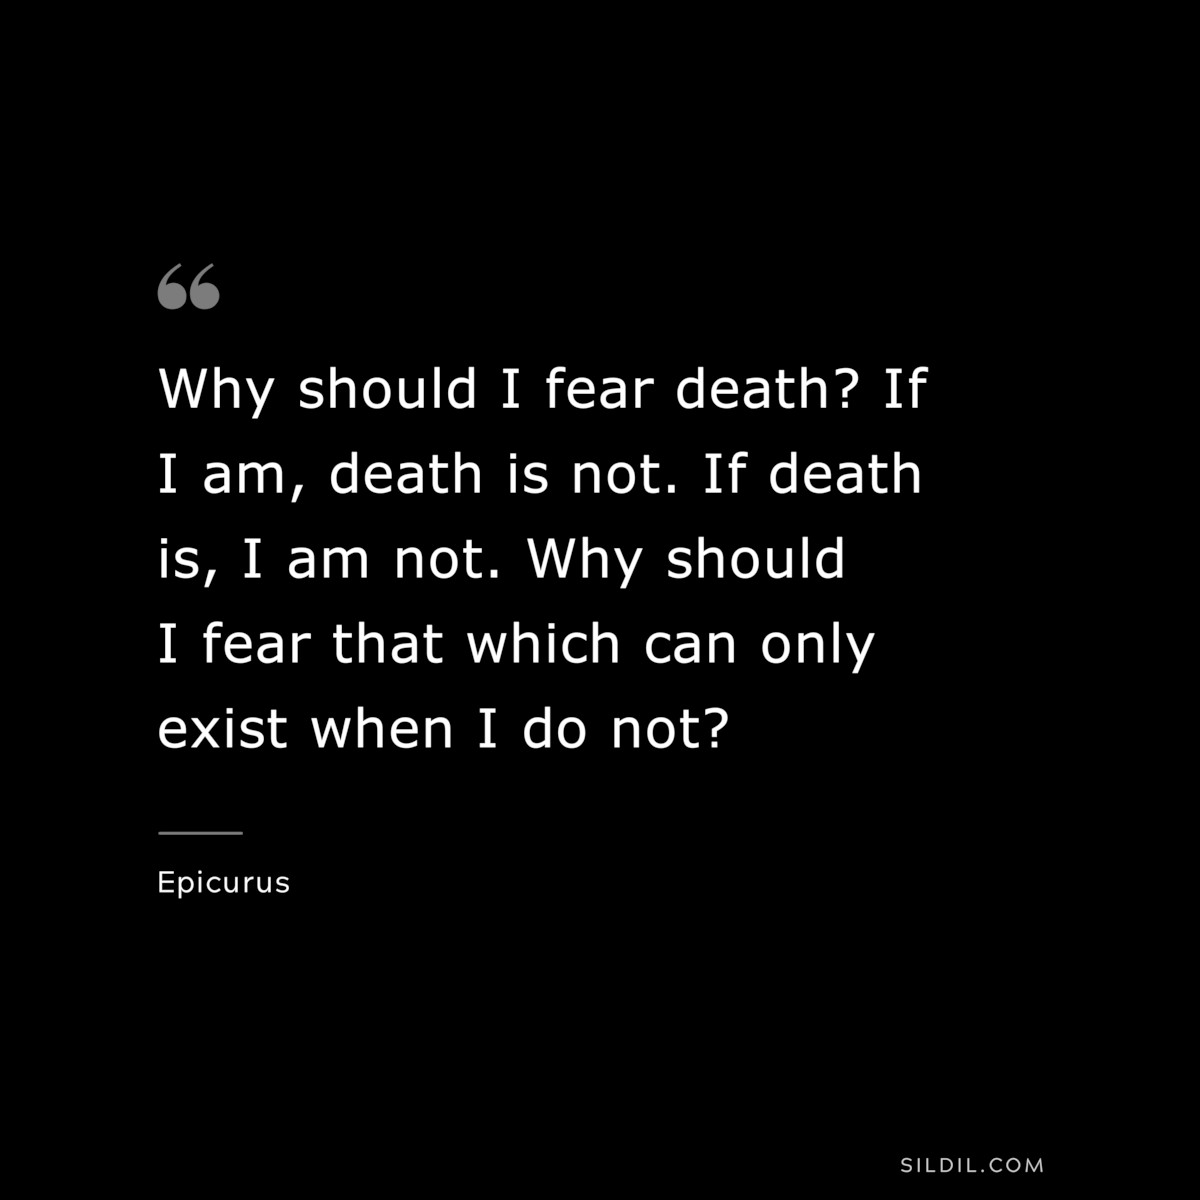 Why should I fear death? If I am, death is not. If death is, I am not. Why should I fear that which can only exist when I do not? — Epicurus